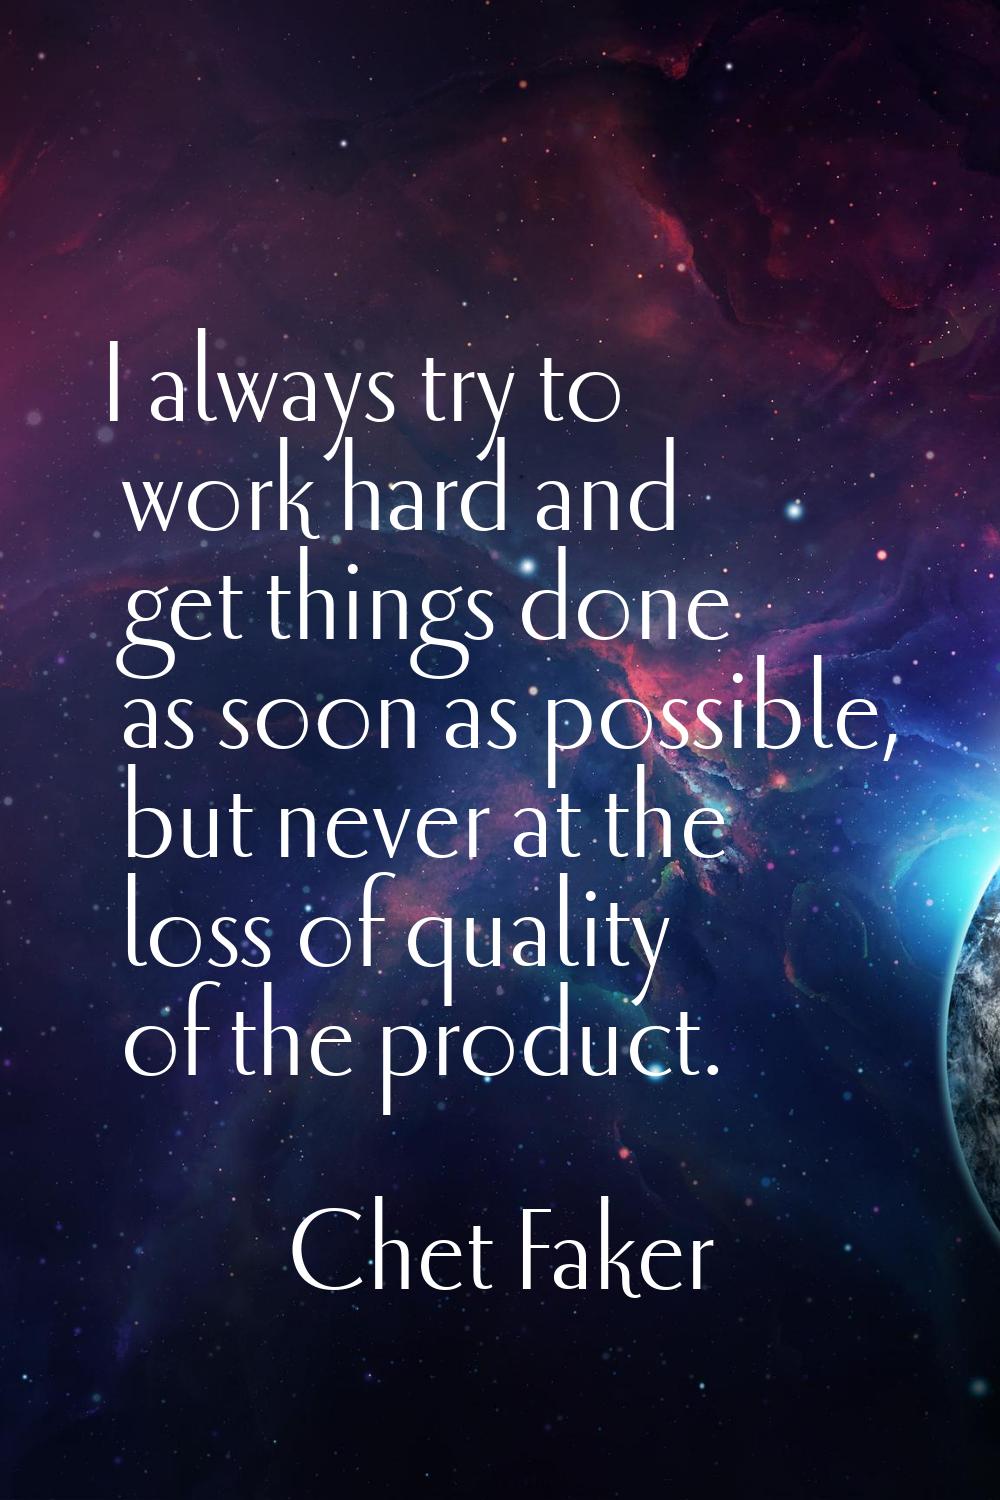 I always try to work hard and get things done as soon as possible, but never at the loss of quality